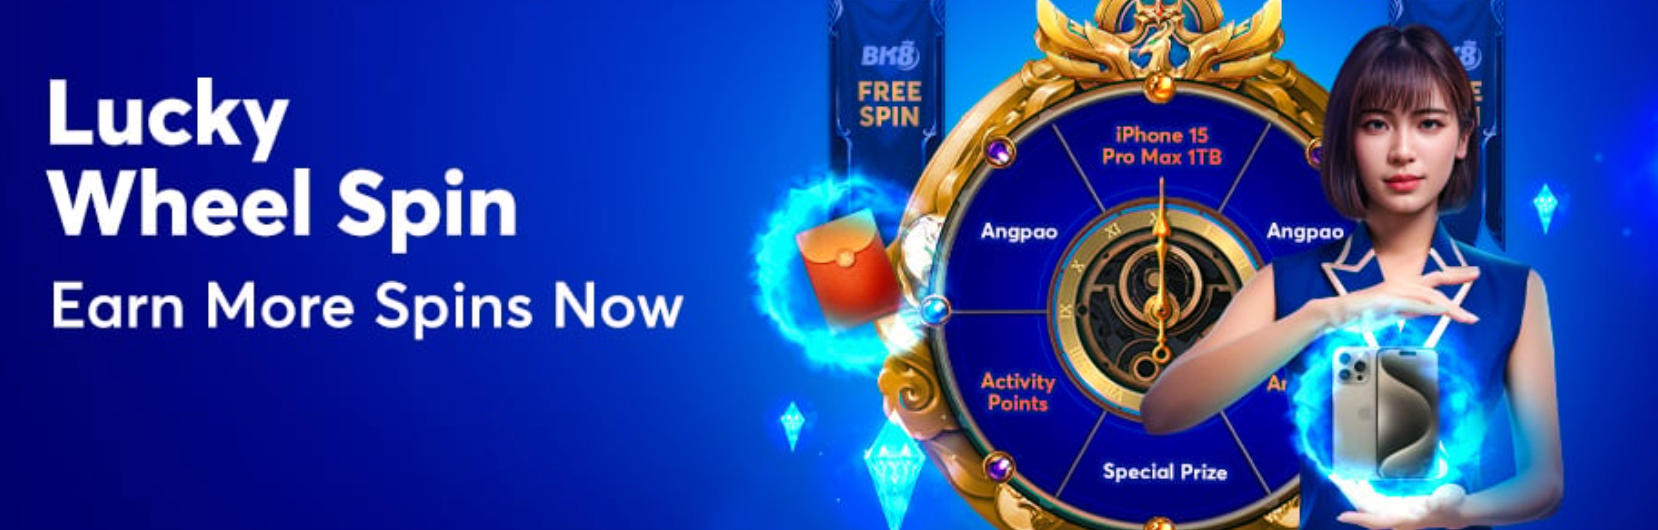 bk8 referral code, casino promotions and bonuses